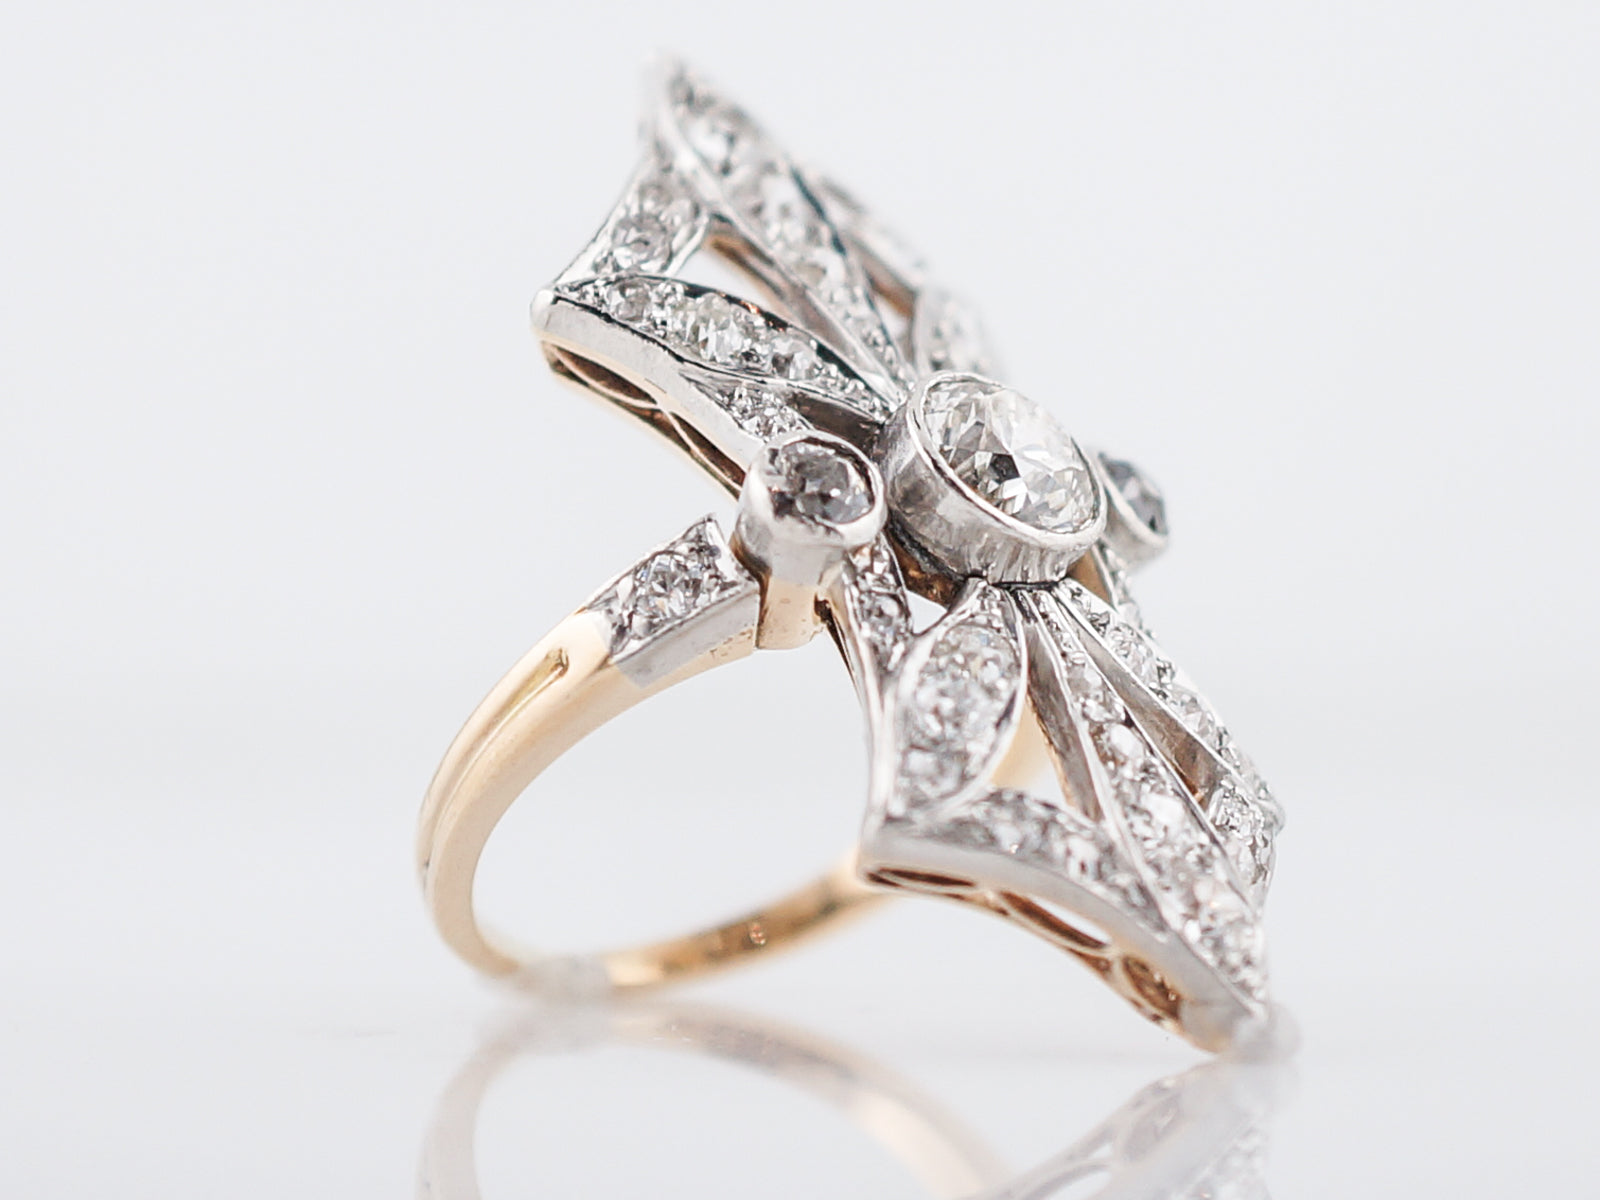 Antique Right Hand Ring Edwardian 1.61 Old European & Mine Cut Diamonds in Platinum & 14k Yellow Gold